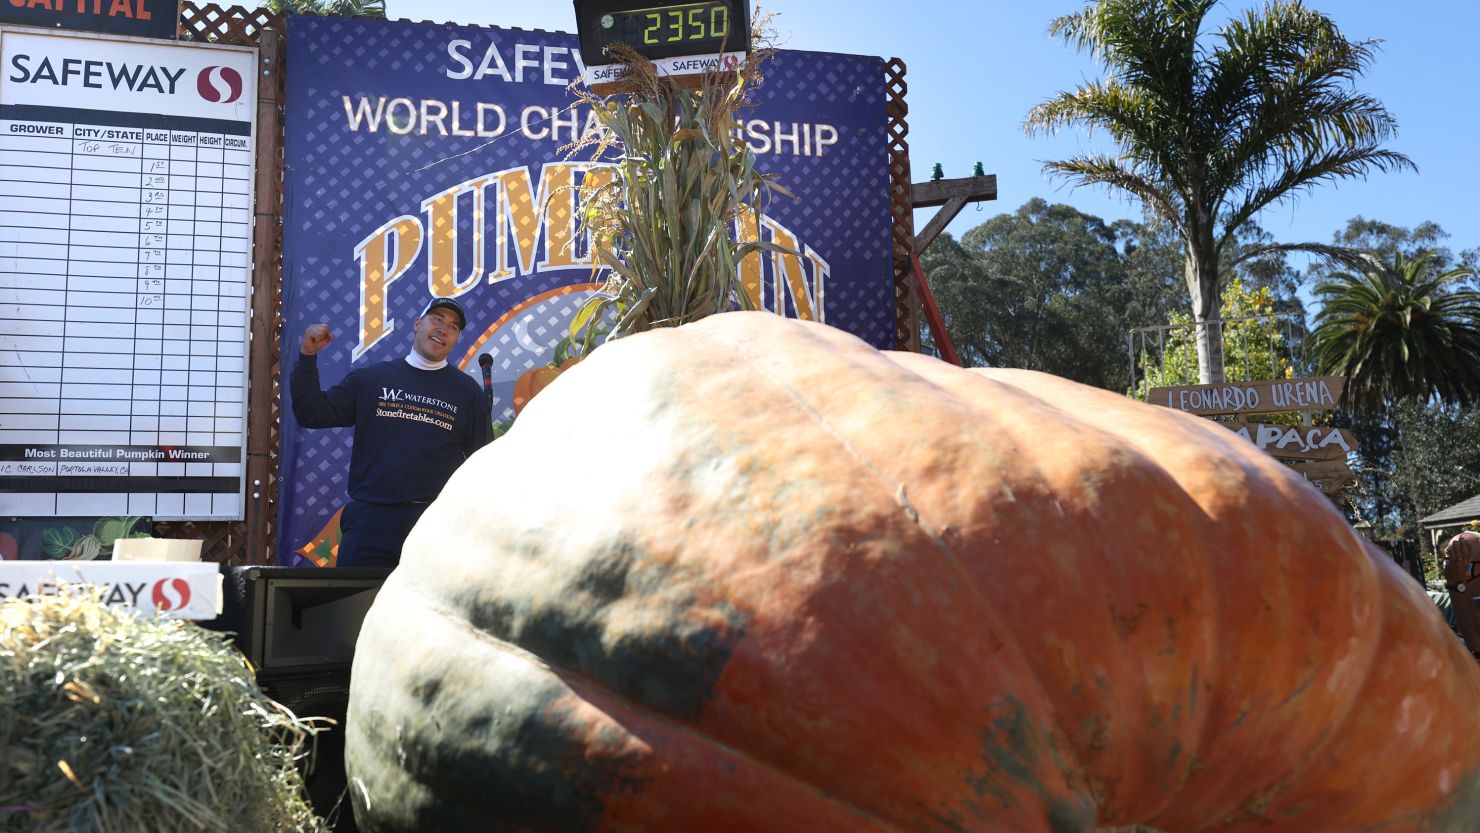 Travis Gienger pumps his fist as he stands next to his pumpkin during the competition in California.